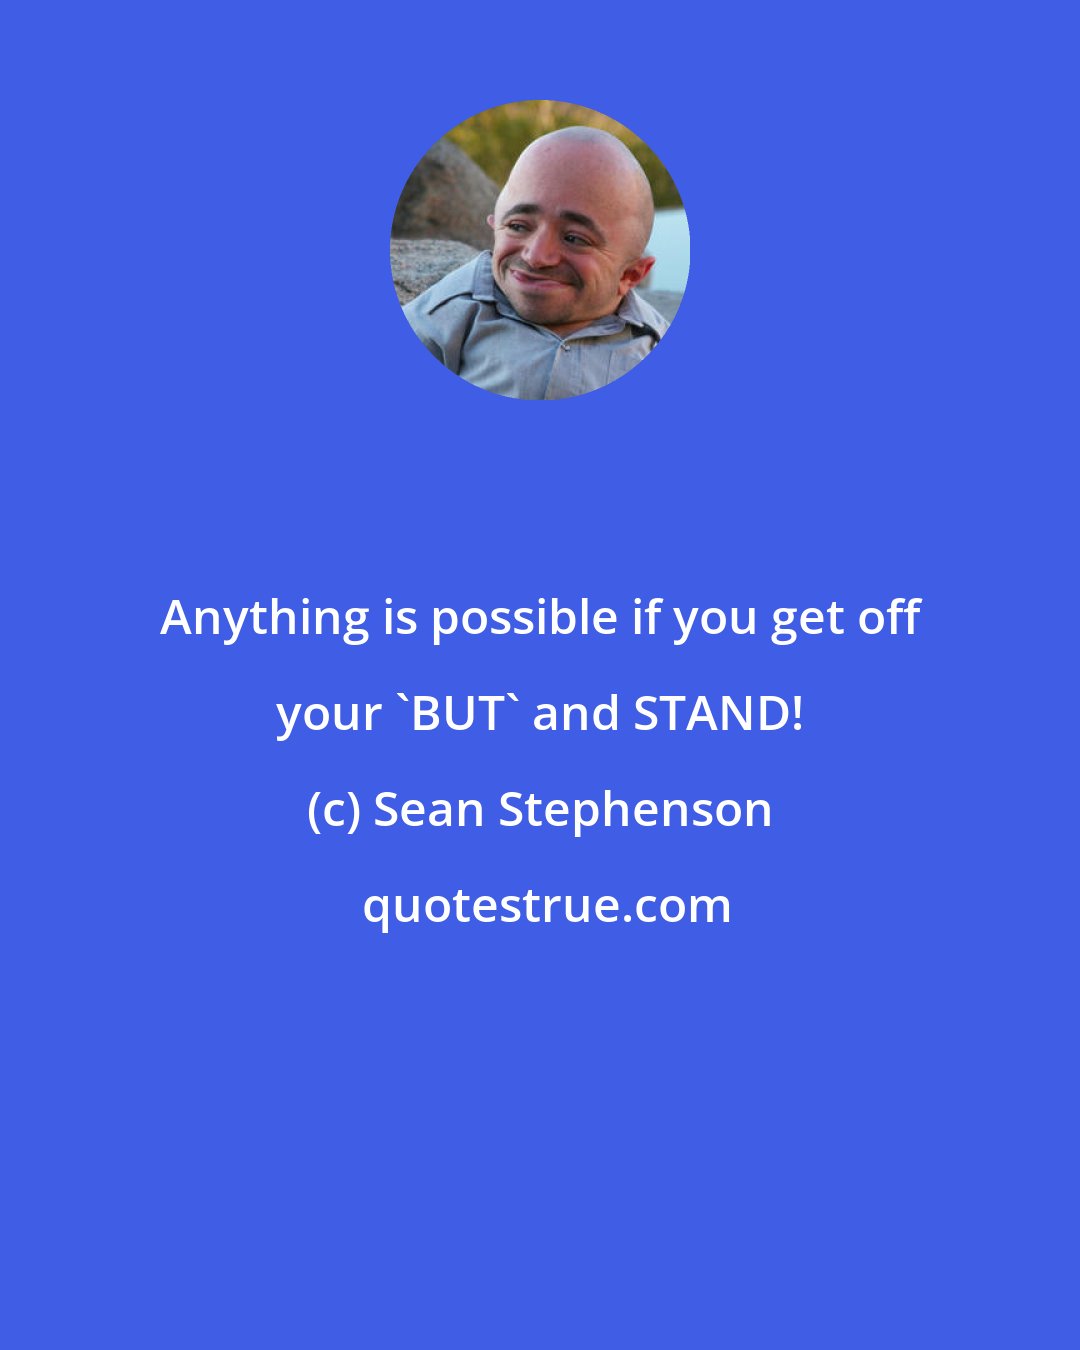 Sean Stephenson: Anything is possible if you get off your 'BUT' and STAND!